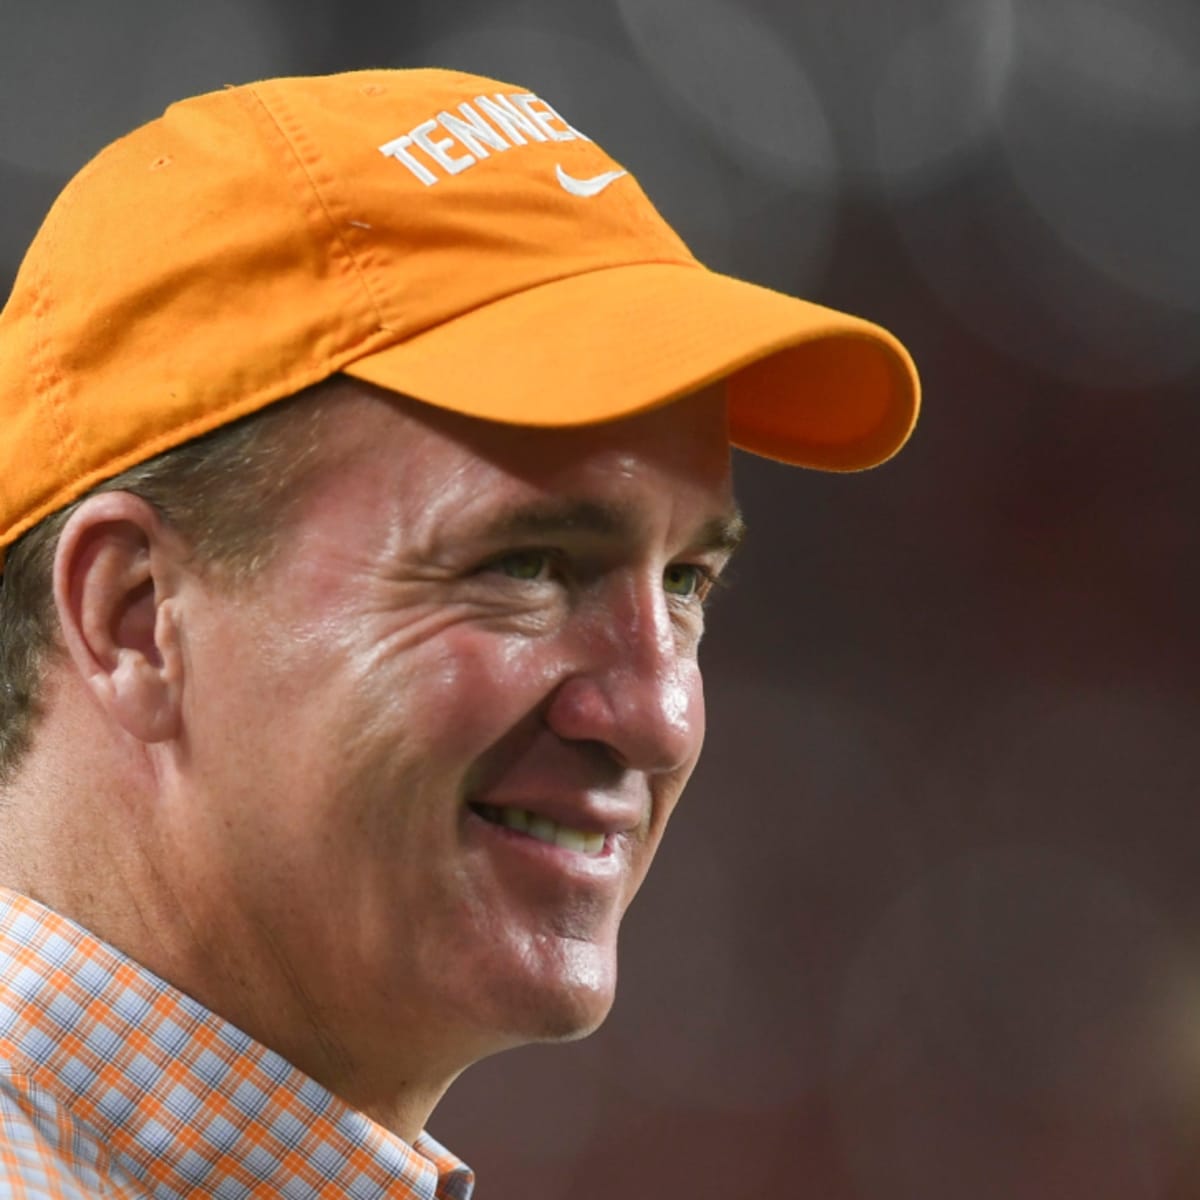 Peyton Manning Gets the Better of a Rivalry, With Some Help - The